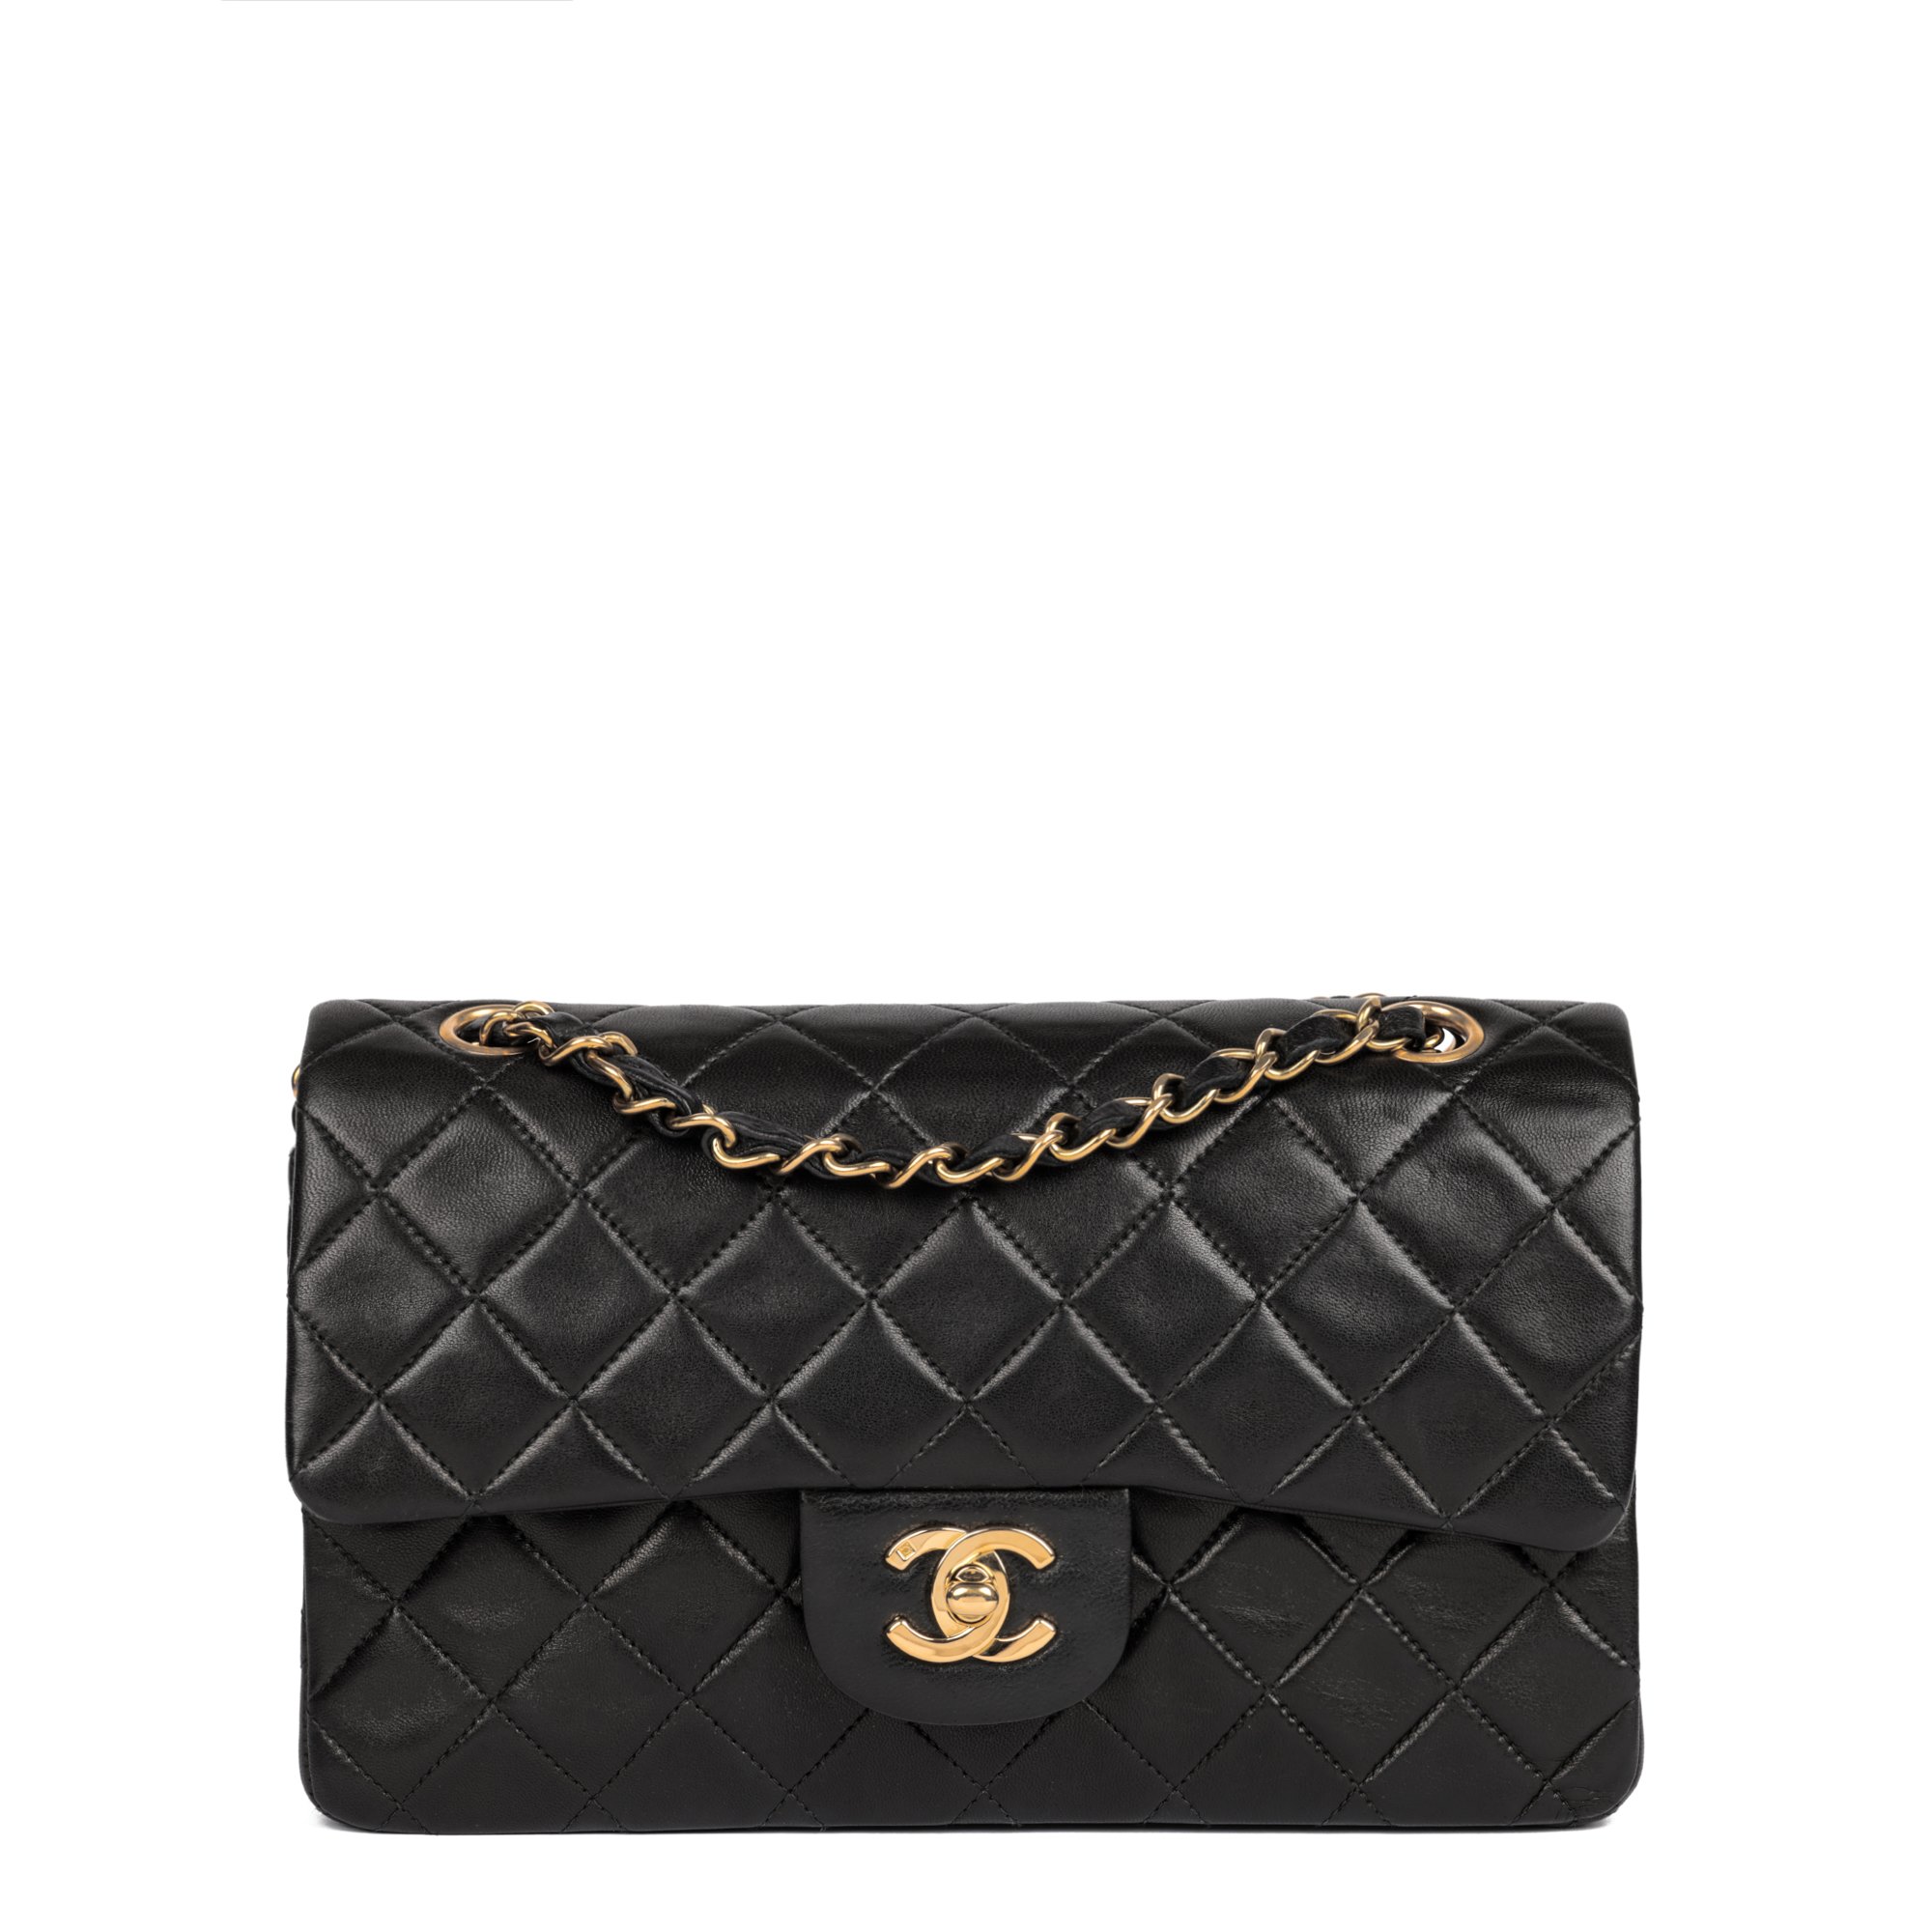 Chanel Small Classic Double Flap Bag 1994 HB5194 | Second Hand Handbags